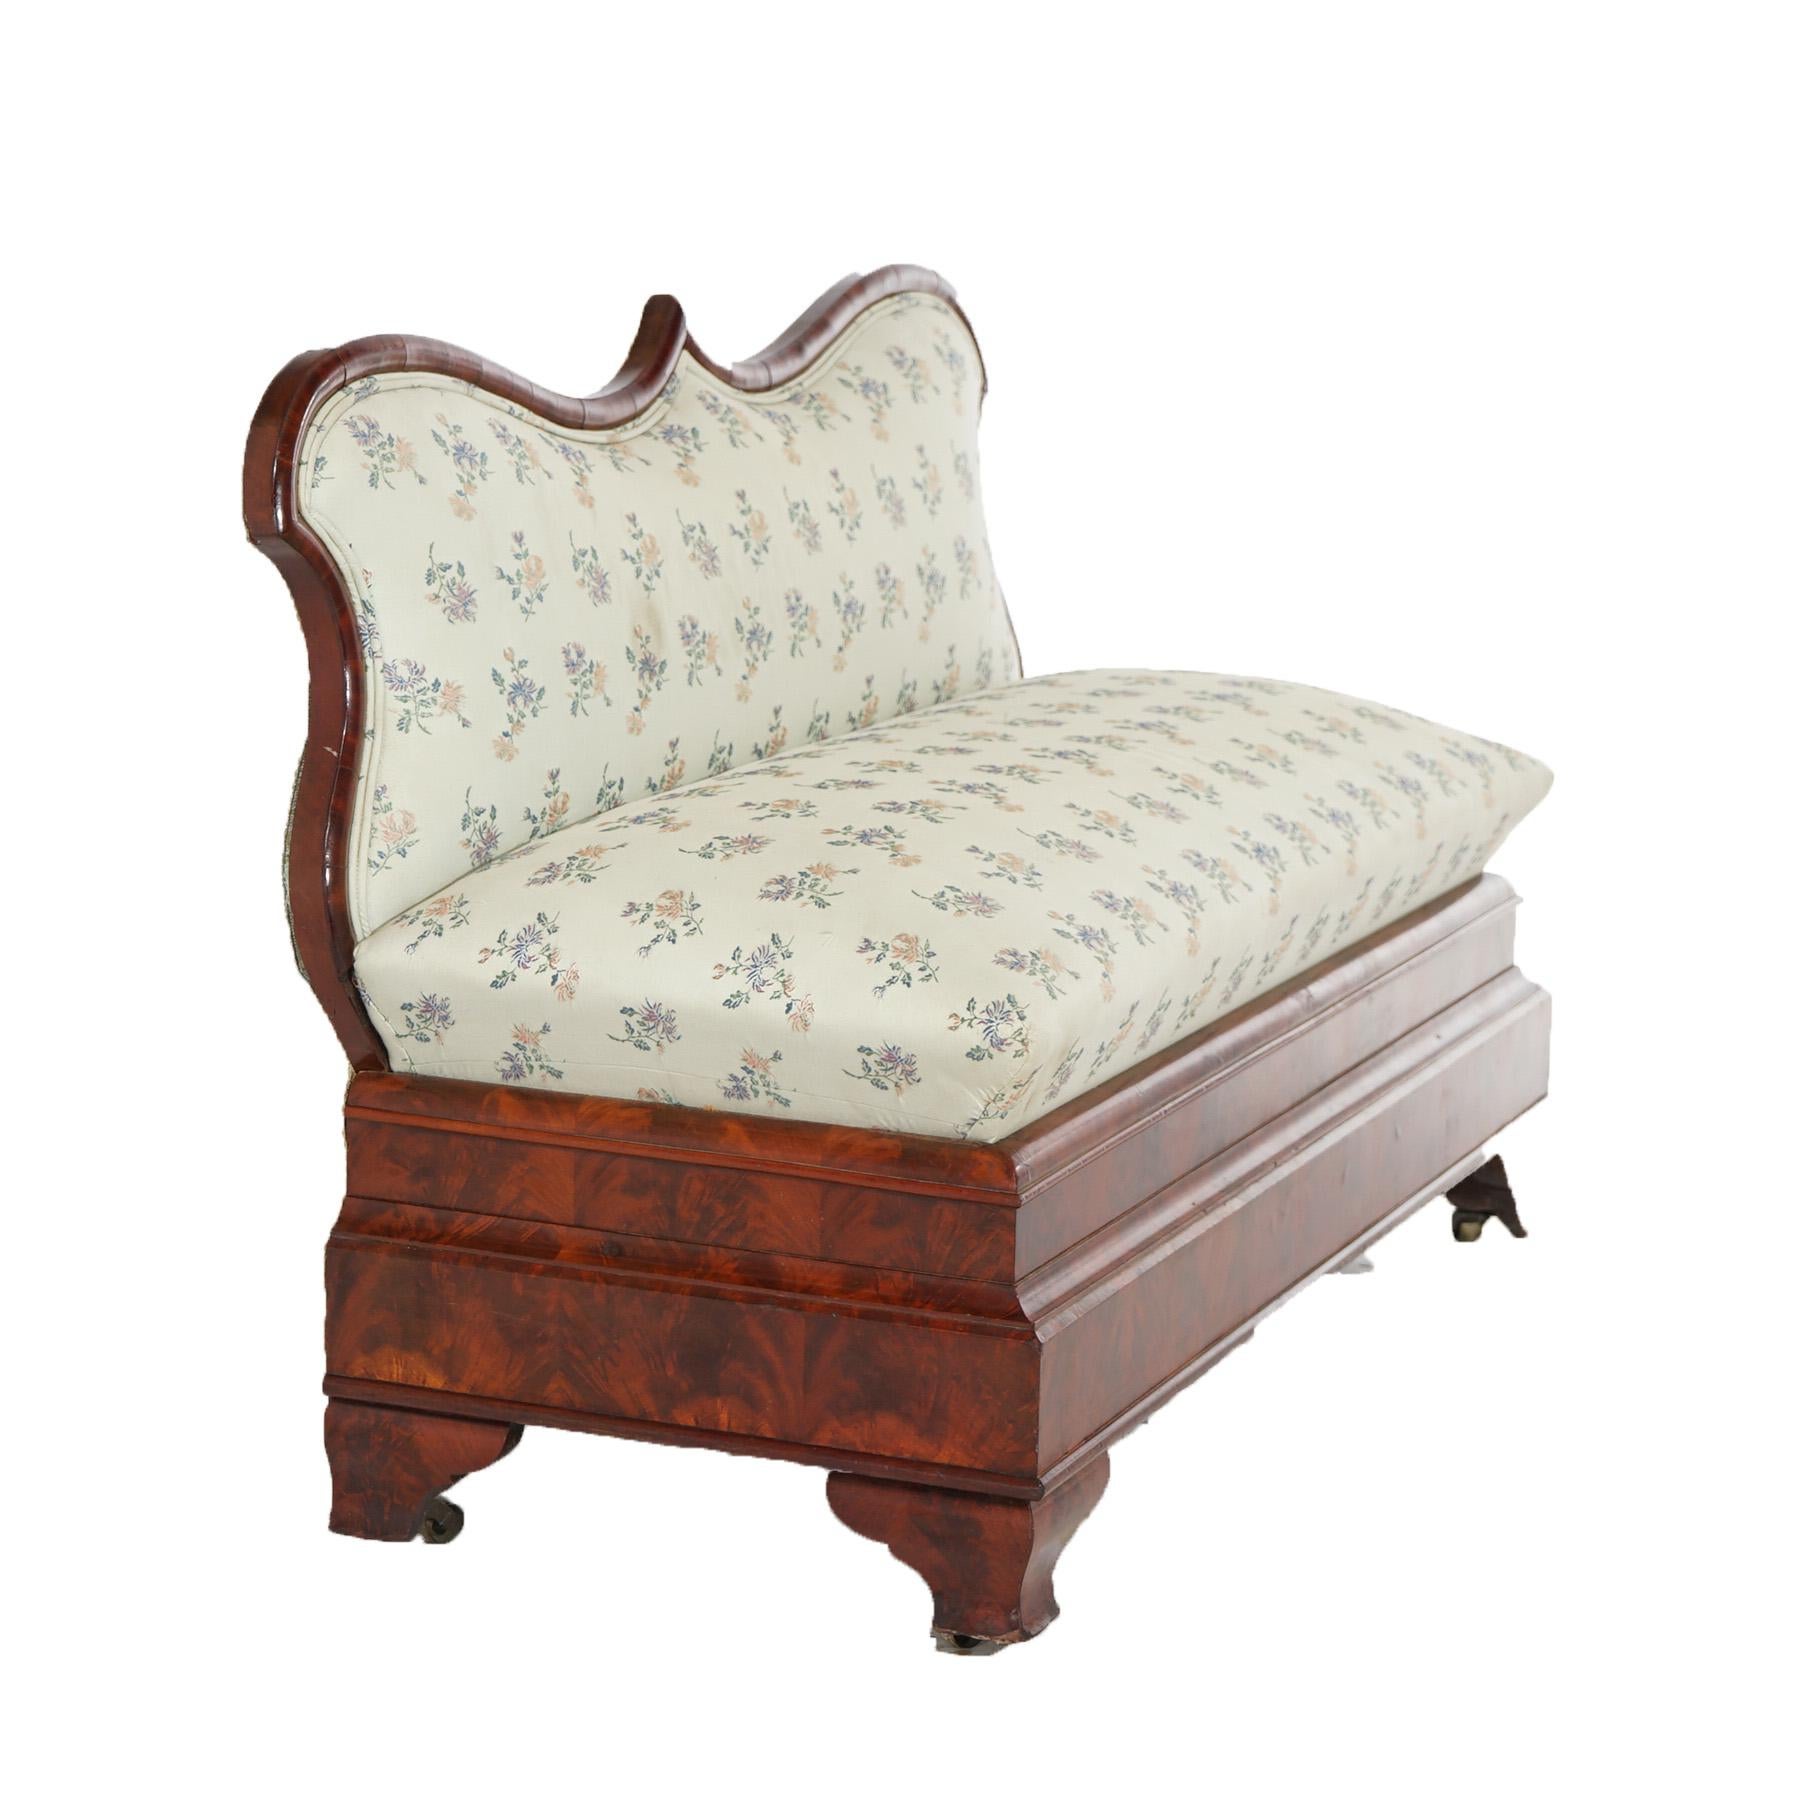 An antique American Empire Classical Greco slipper bench offers flame mahogany frame with shaped back with upholstered back and bench over ogee base raised on bracket feet, c1840

Measures- 32.25''H x 48''W x 20.75''D